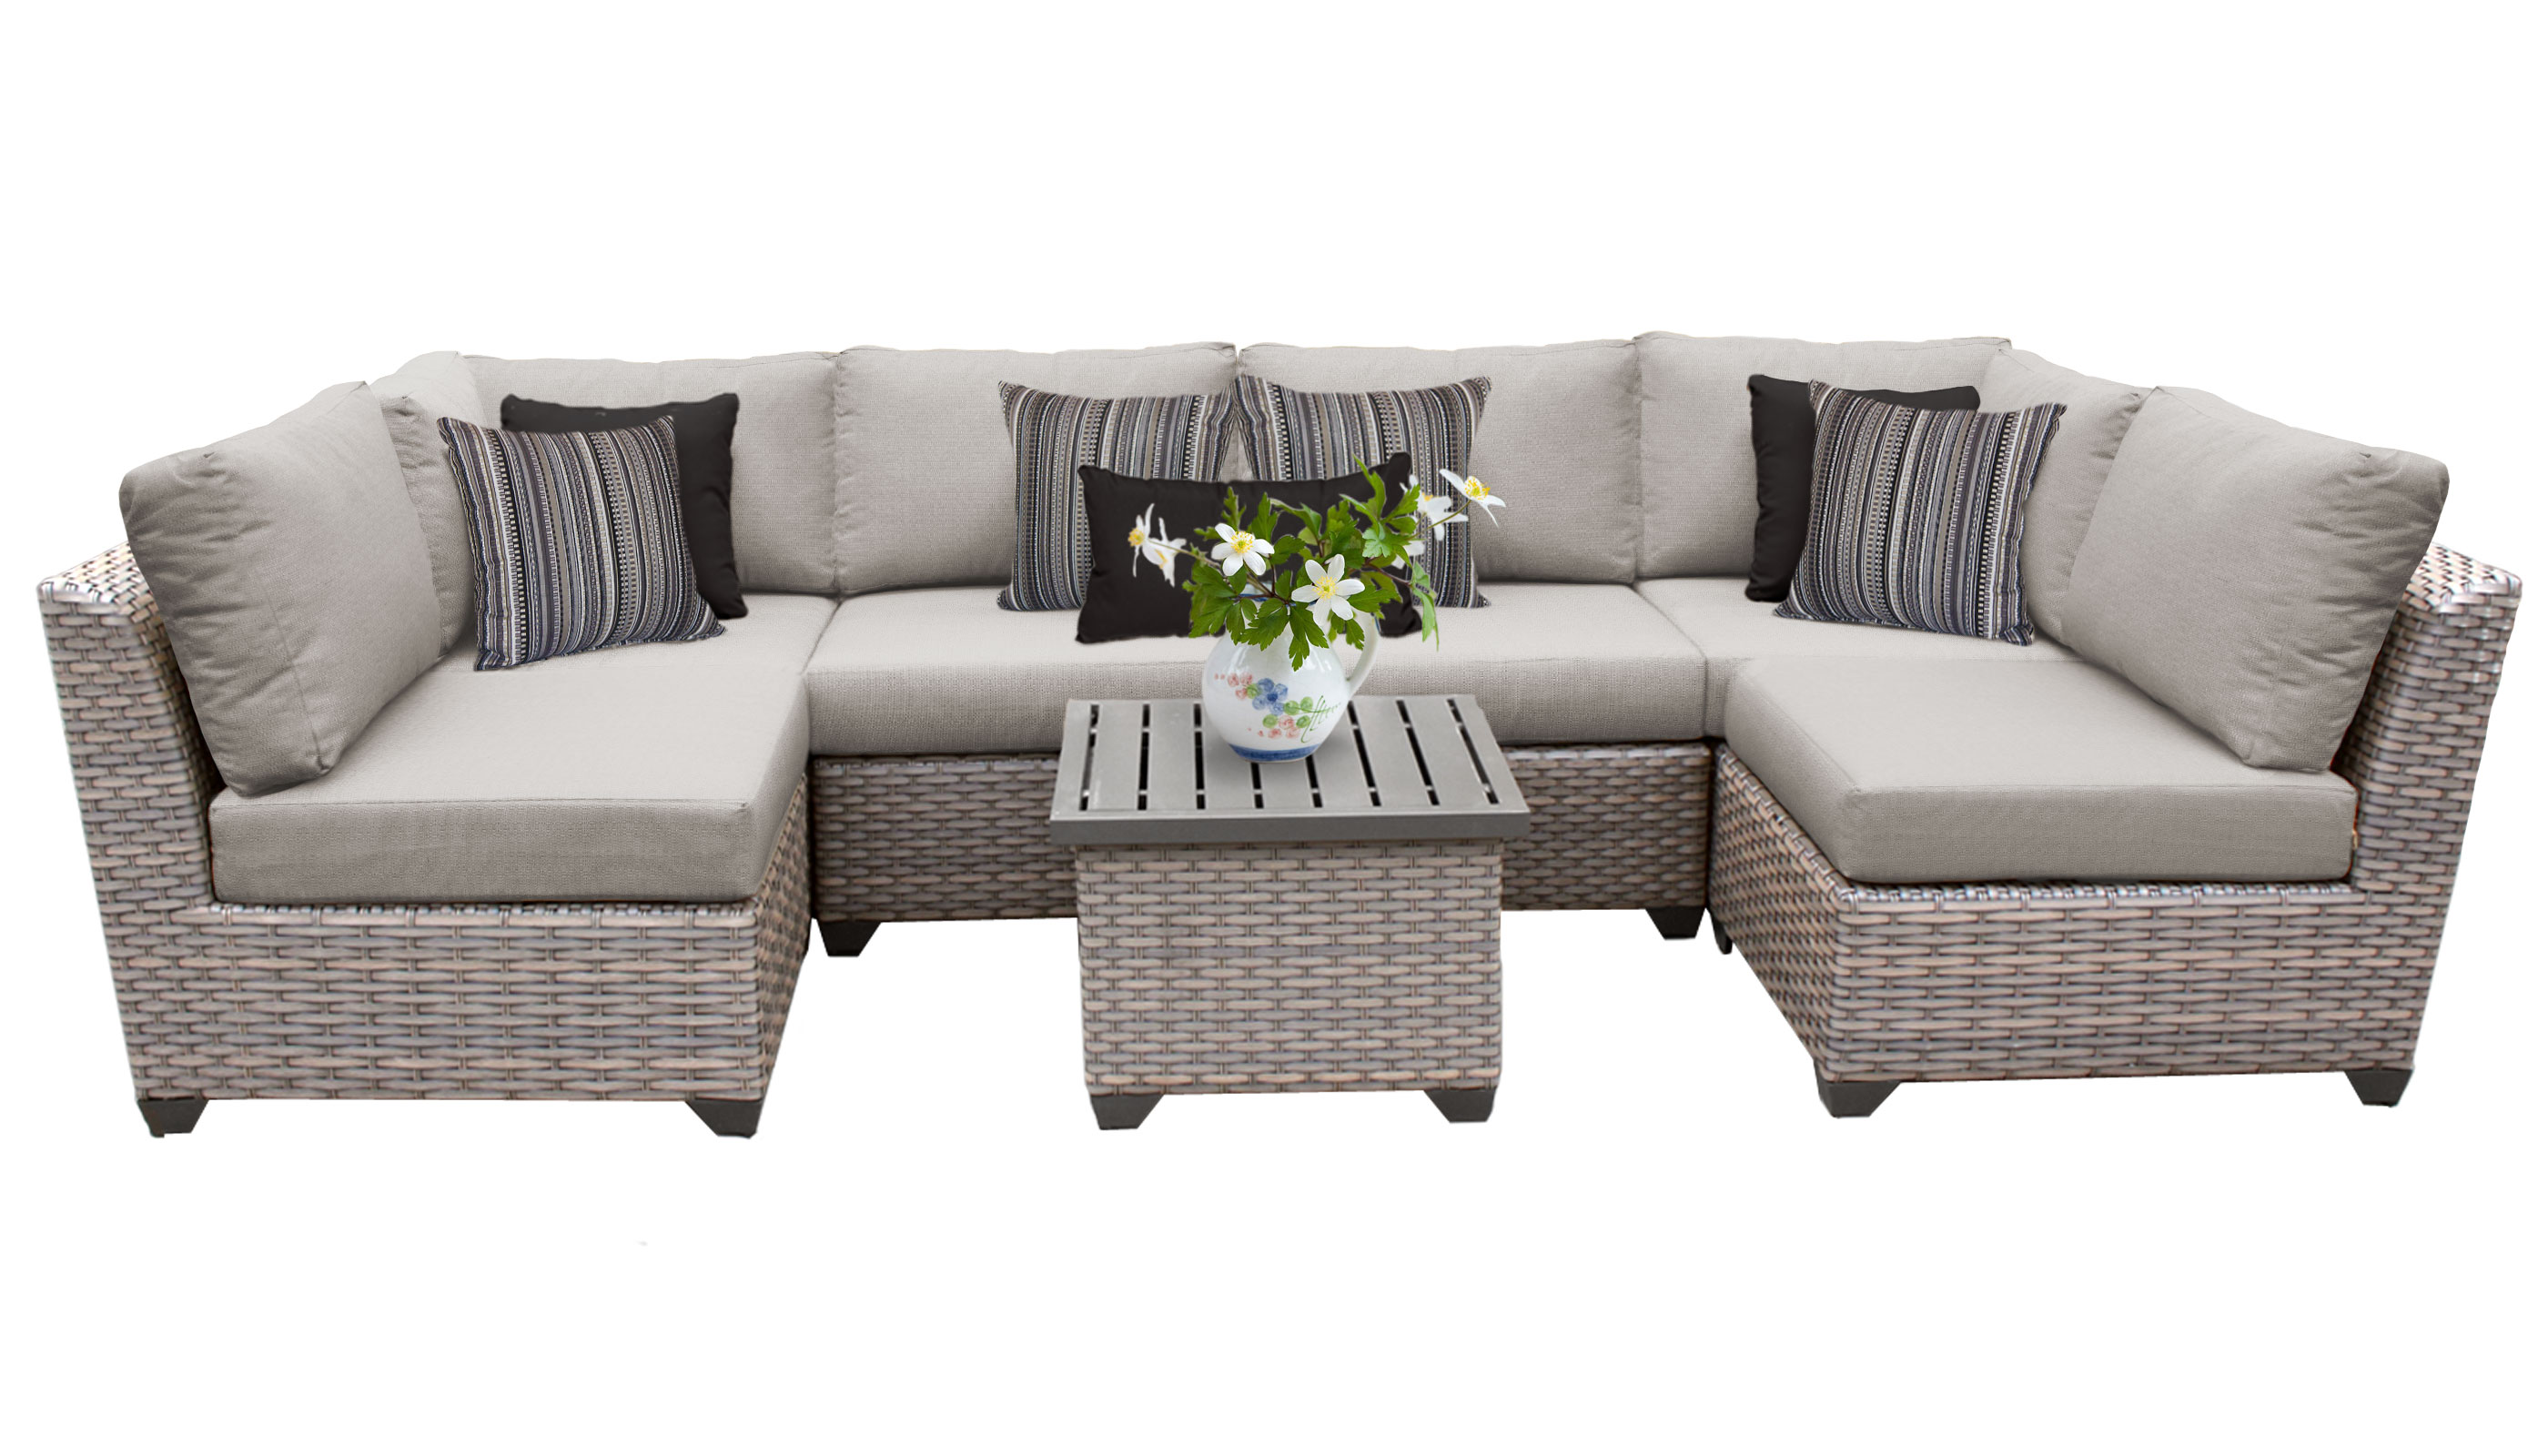 Florence 7 Piece Outdoor Wicker Patio Furniture Set 07c - image 1 of 2